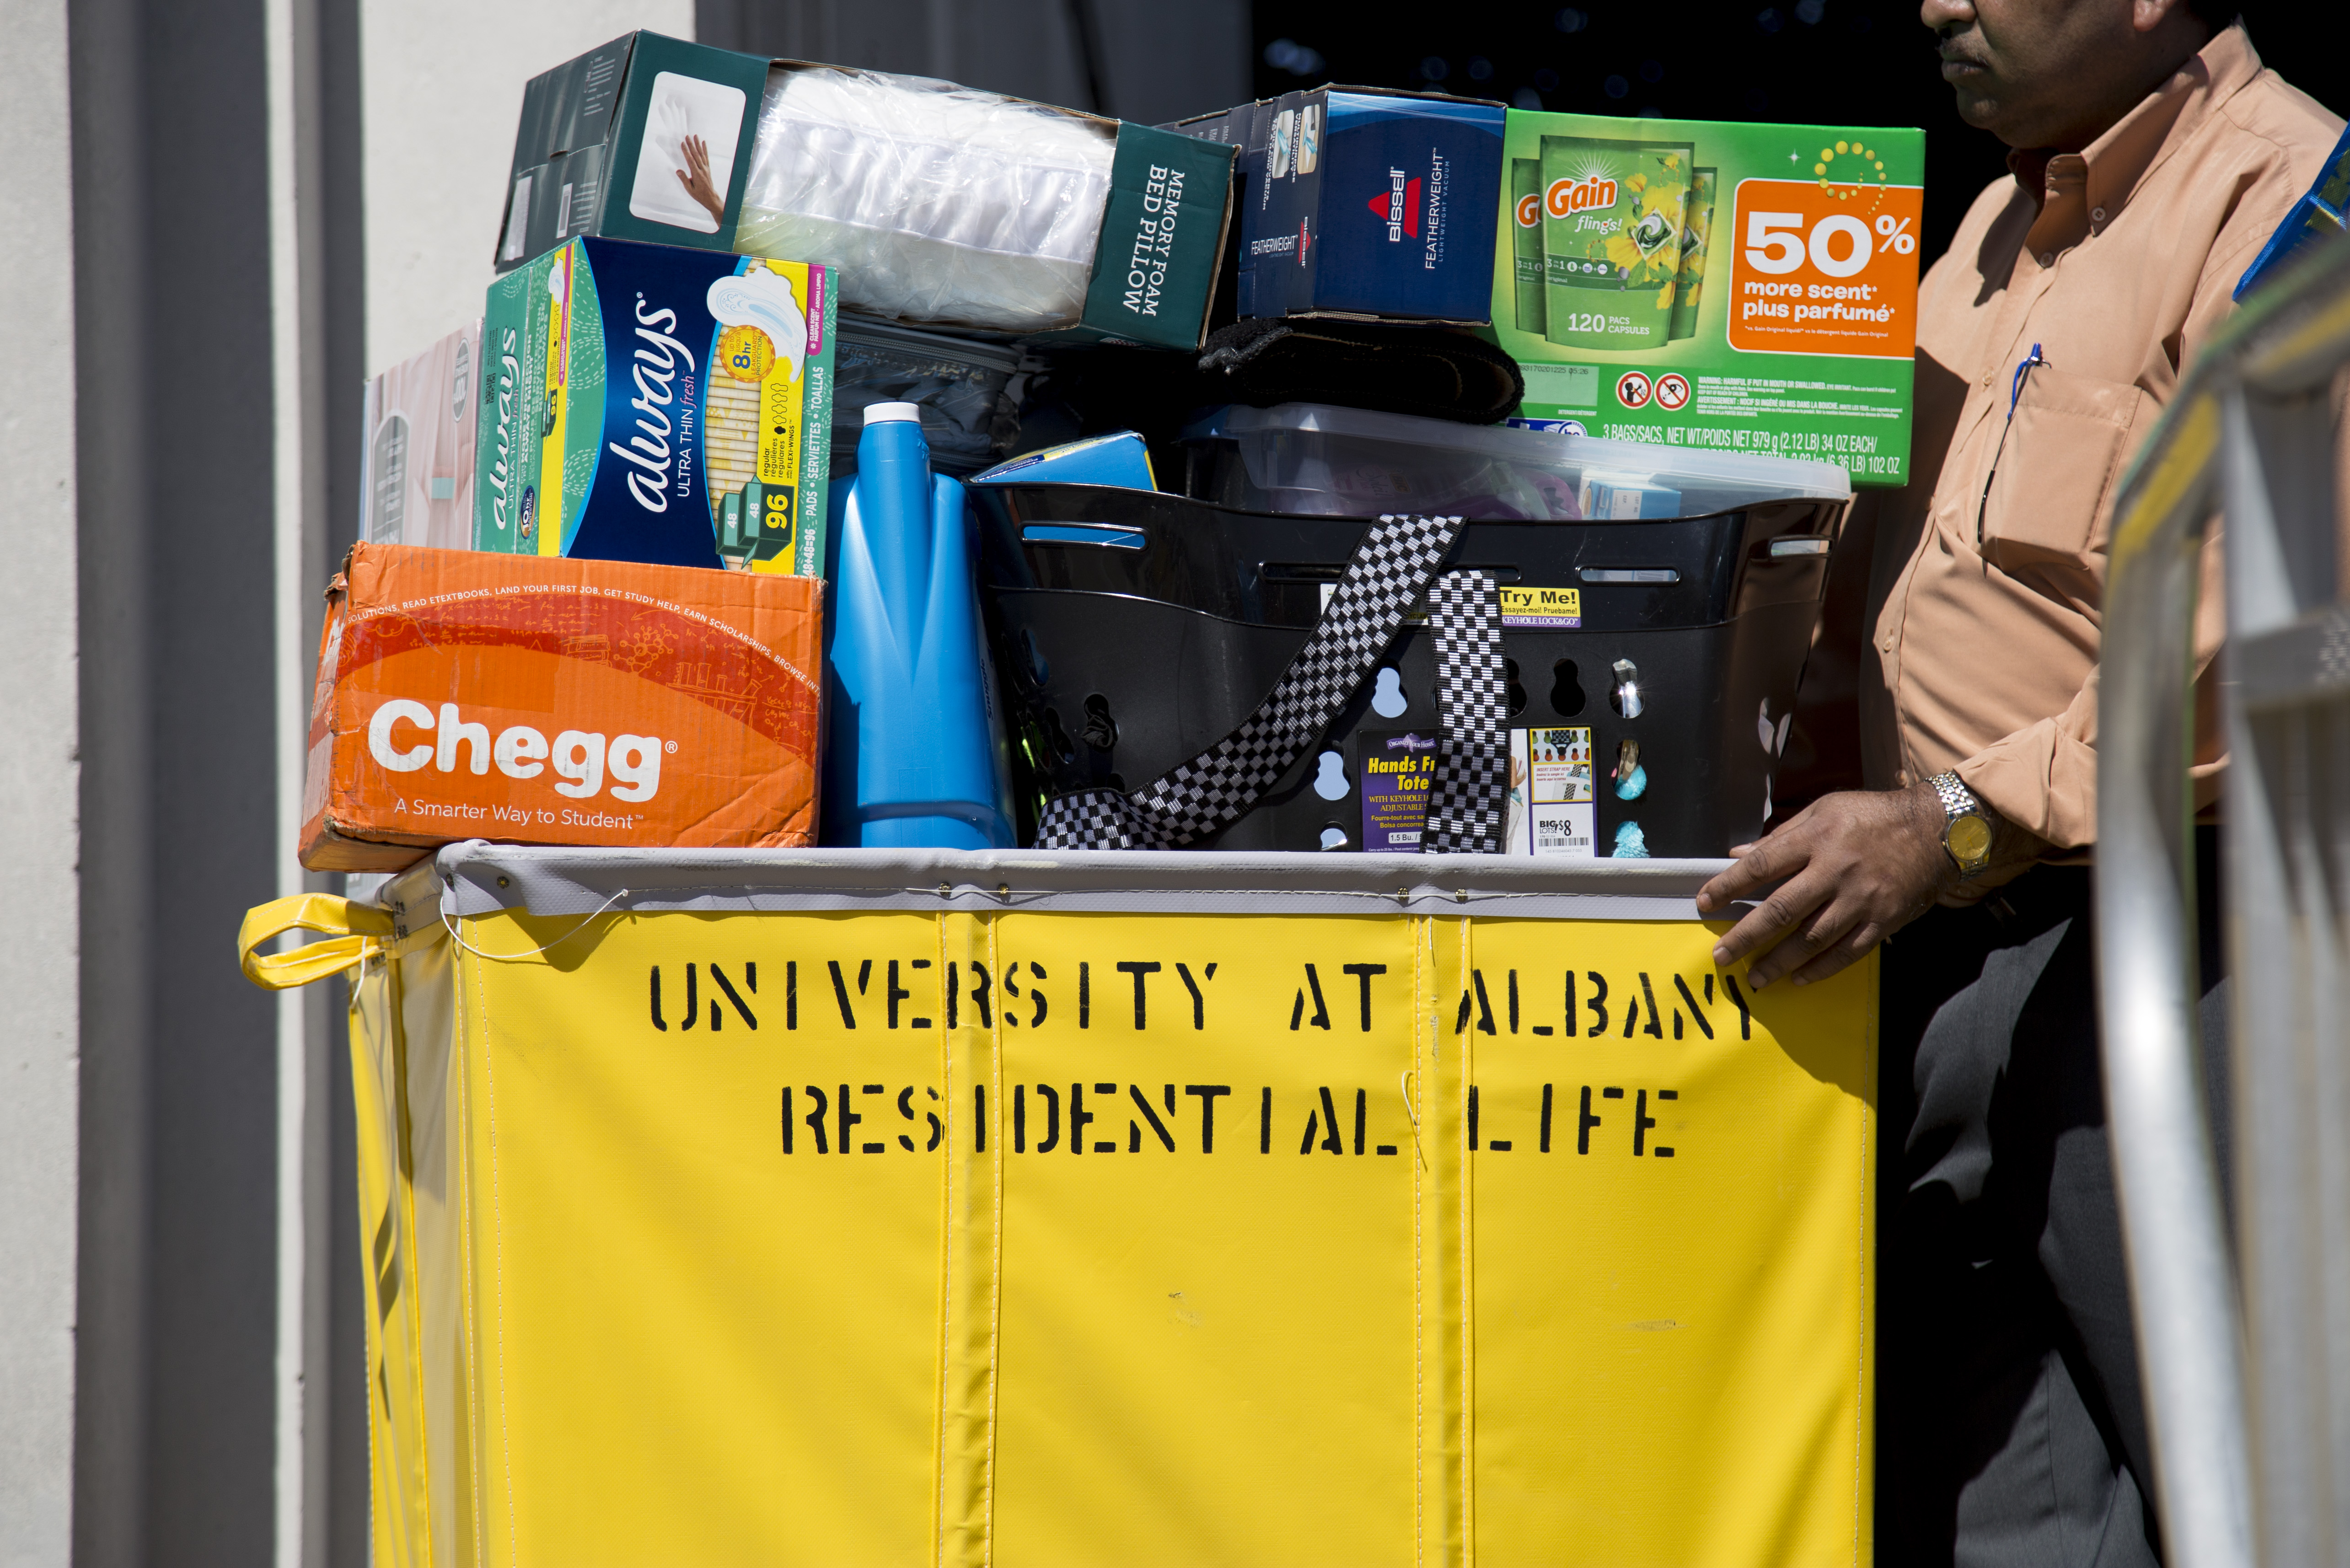 A man pushes a yellow rolling bin labeled "University at Albany Residential Life" that is full of a student's belongings